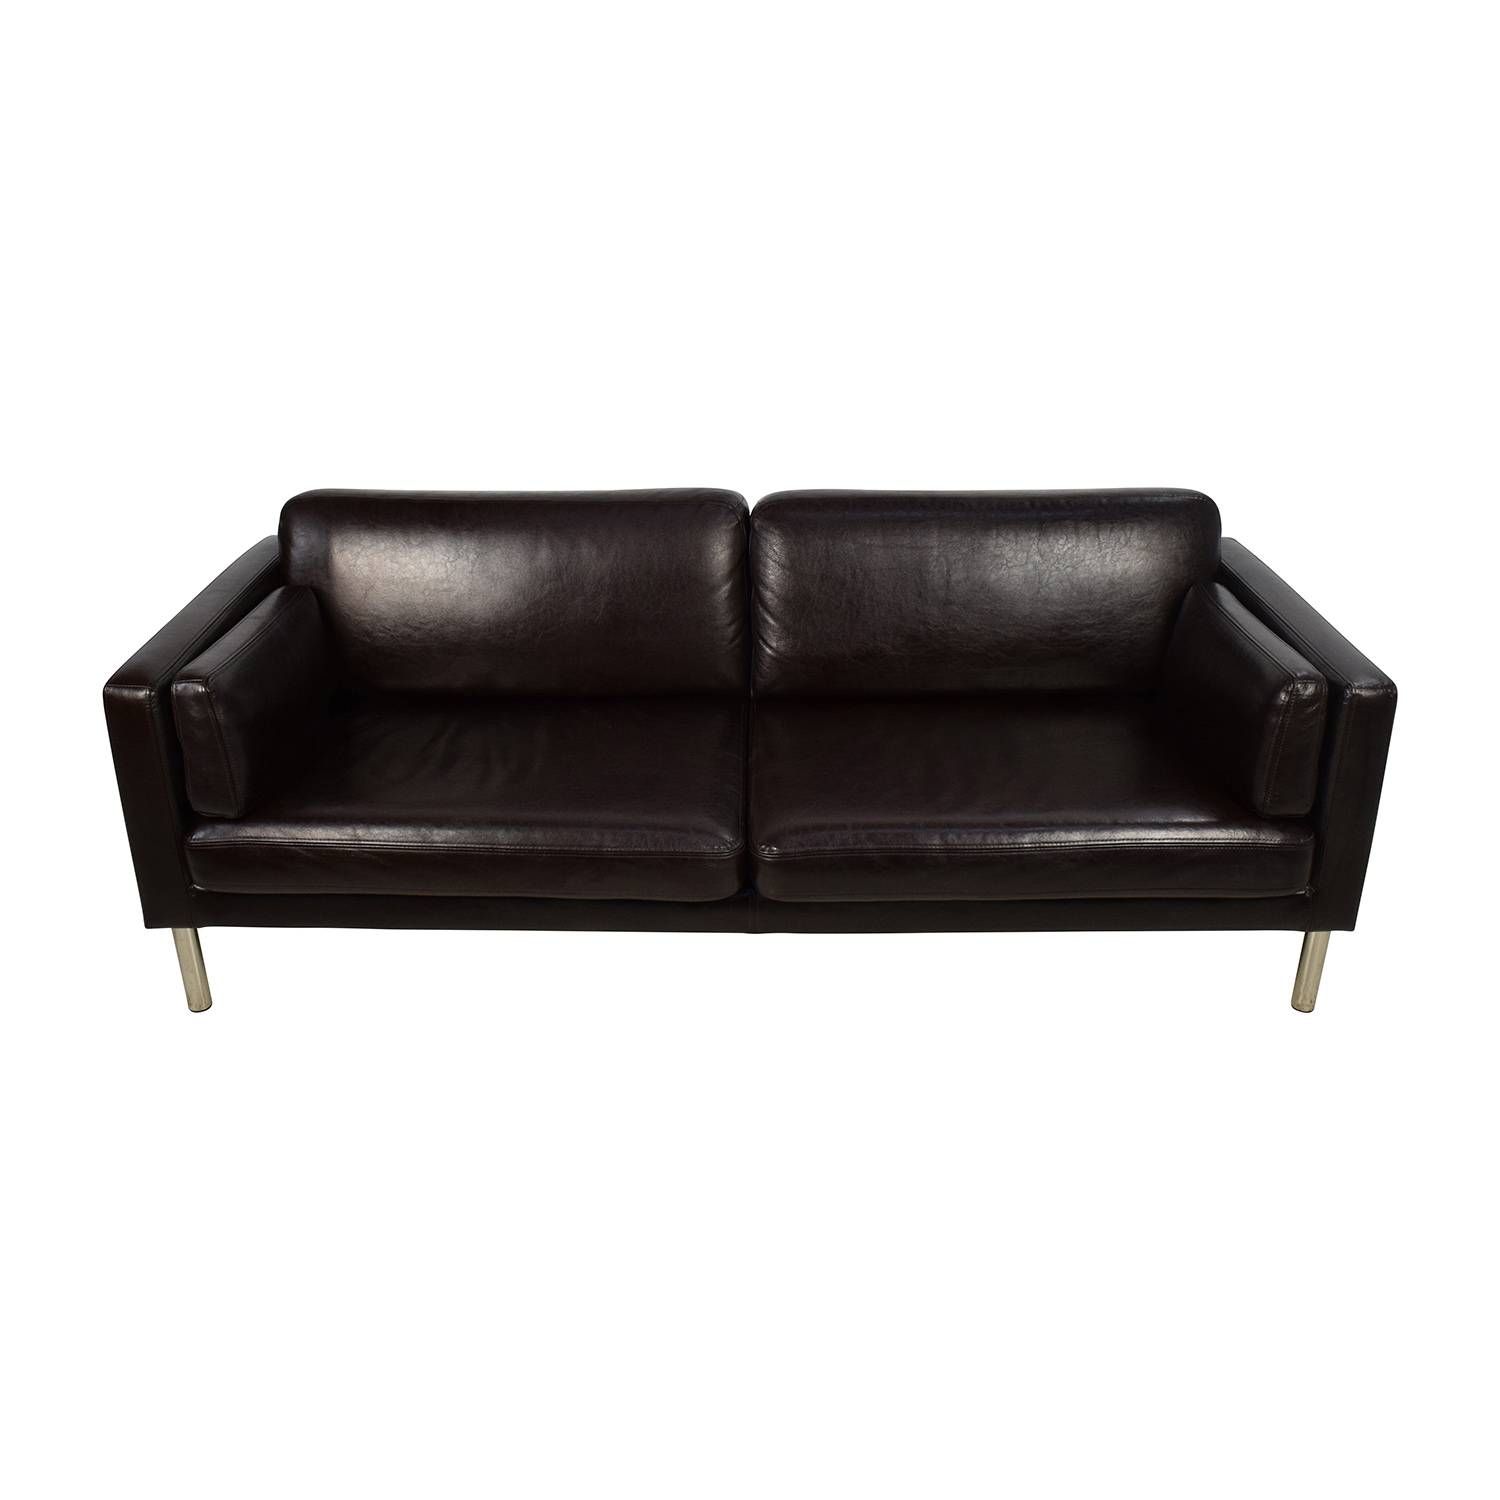 76% Off – Brown Leather Sofa With Chrome Legs / Sofas Throughout Sofas With Chrome Legs (View 3 of 15)